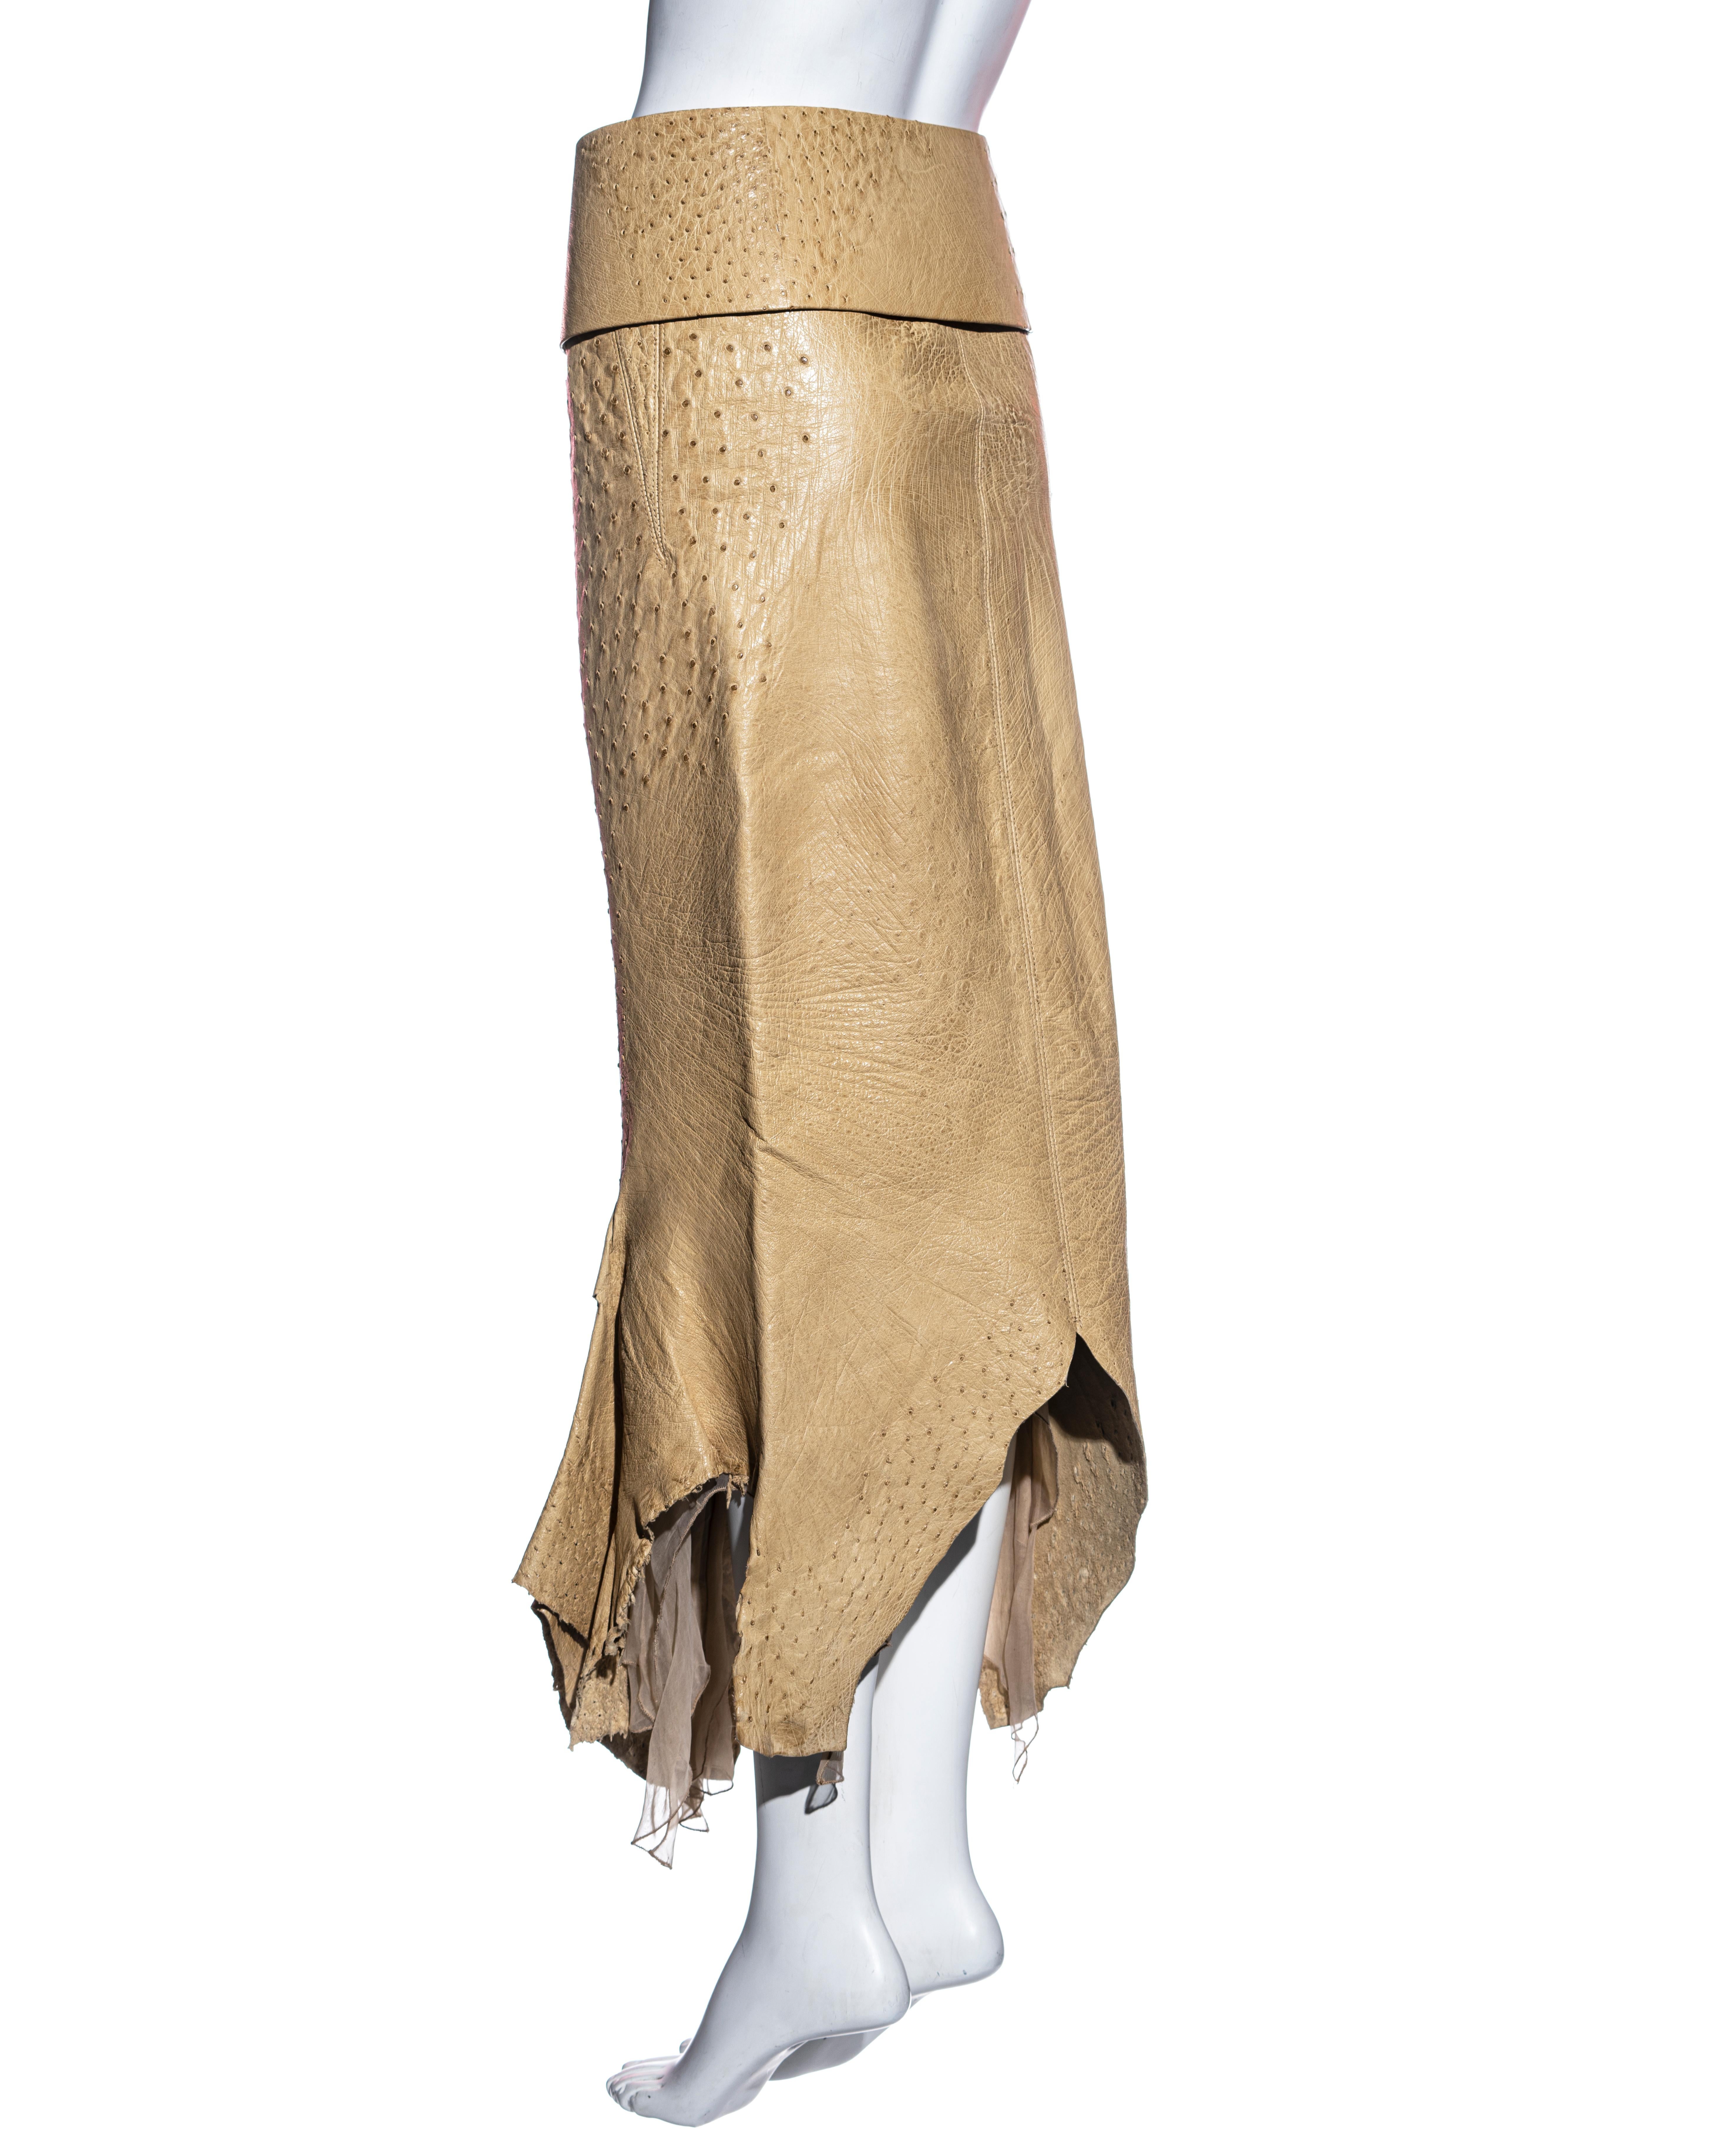 Beige Gianfranco Ferre beige ostrich leather skirt and belt, ss 2000 For Sale